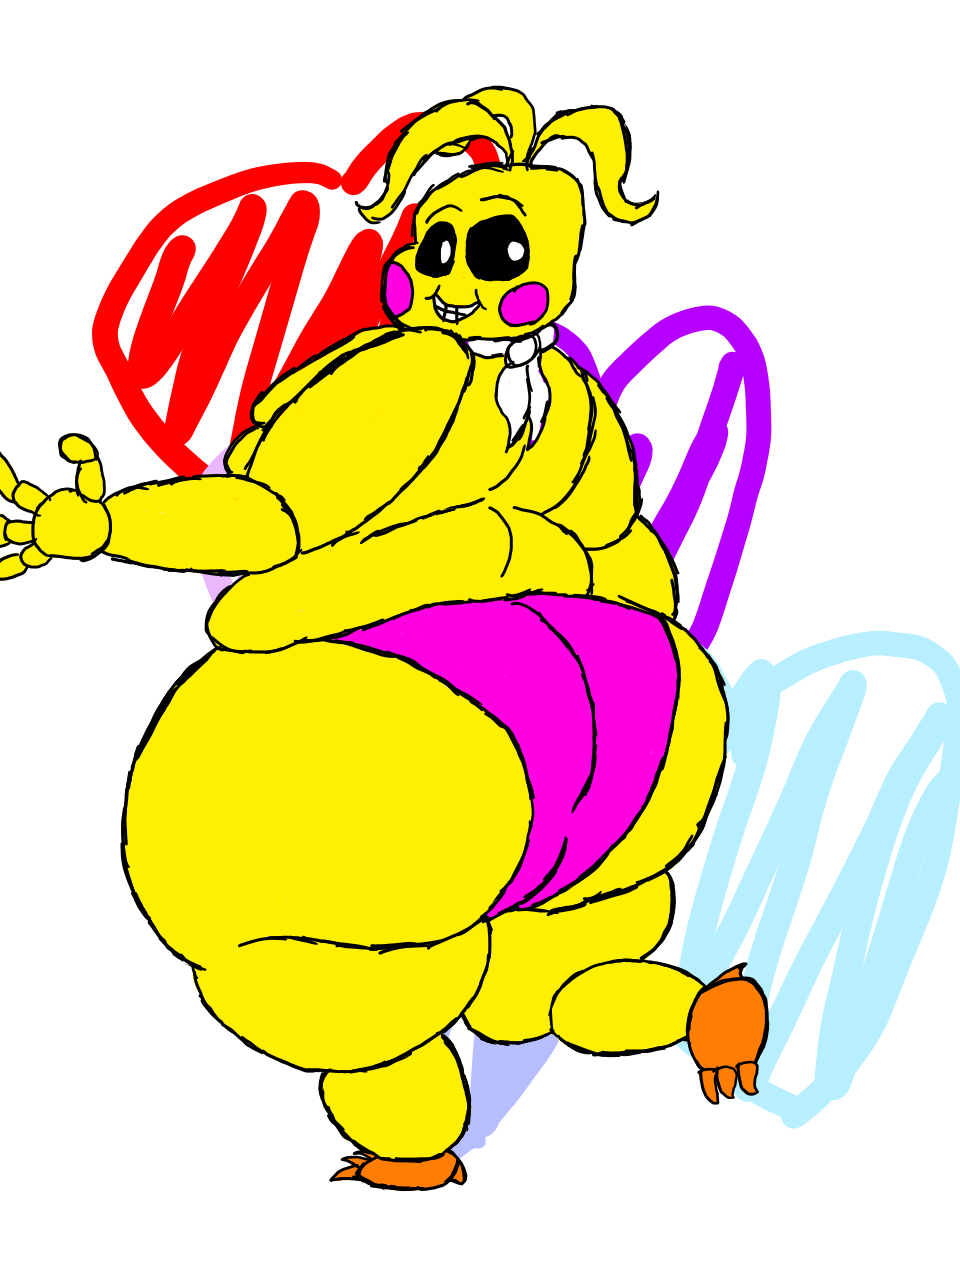 Chubby. five. fnaf. chica. at. 